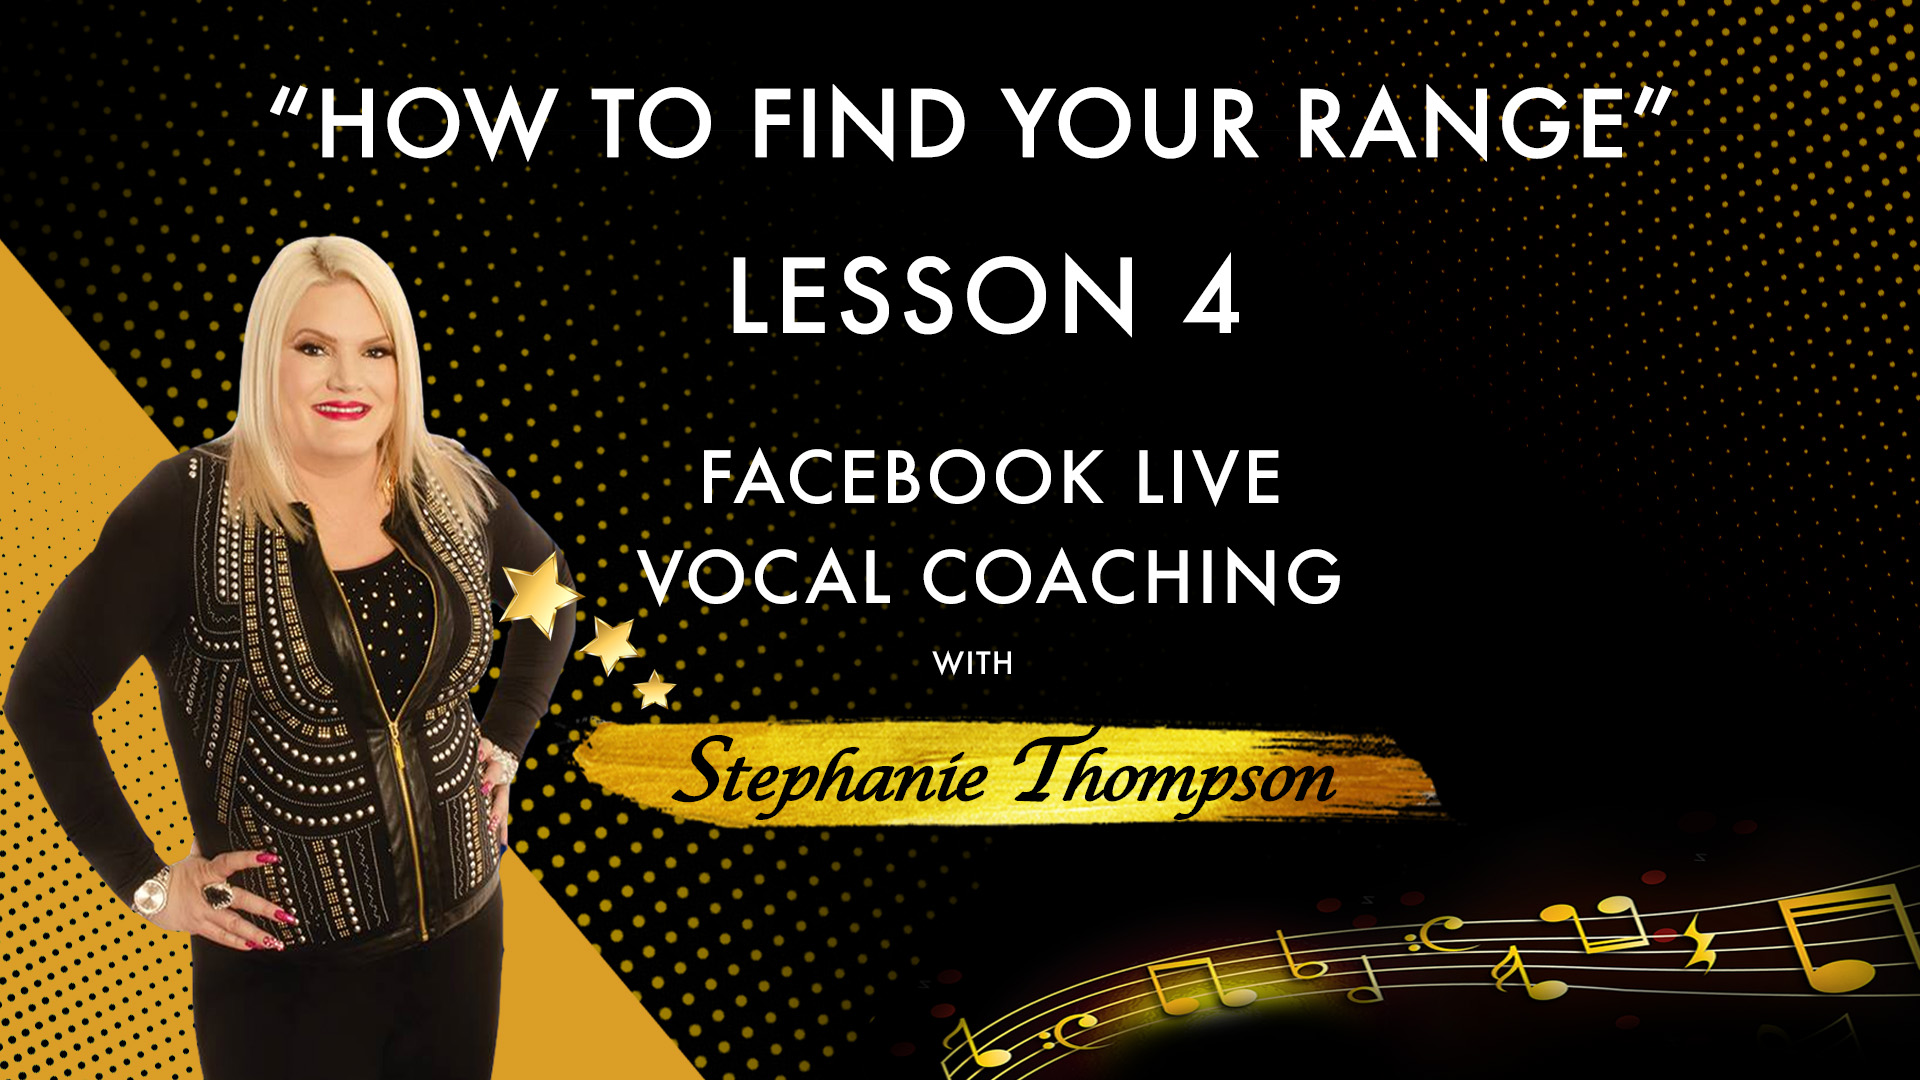 Lesson 4 - How to Find Your Range